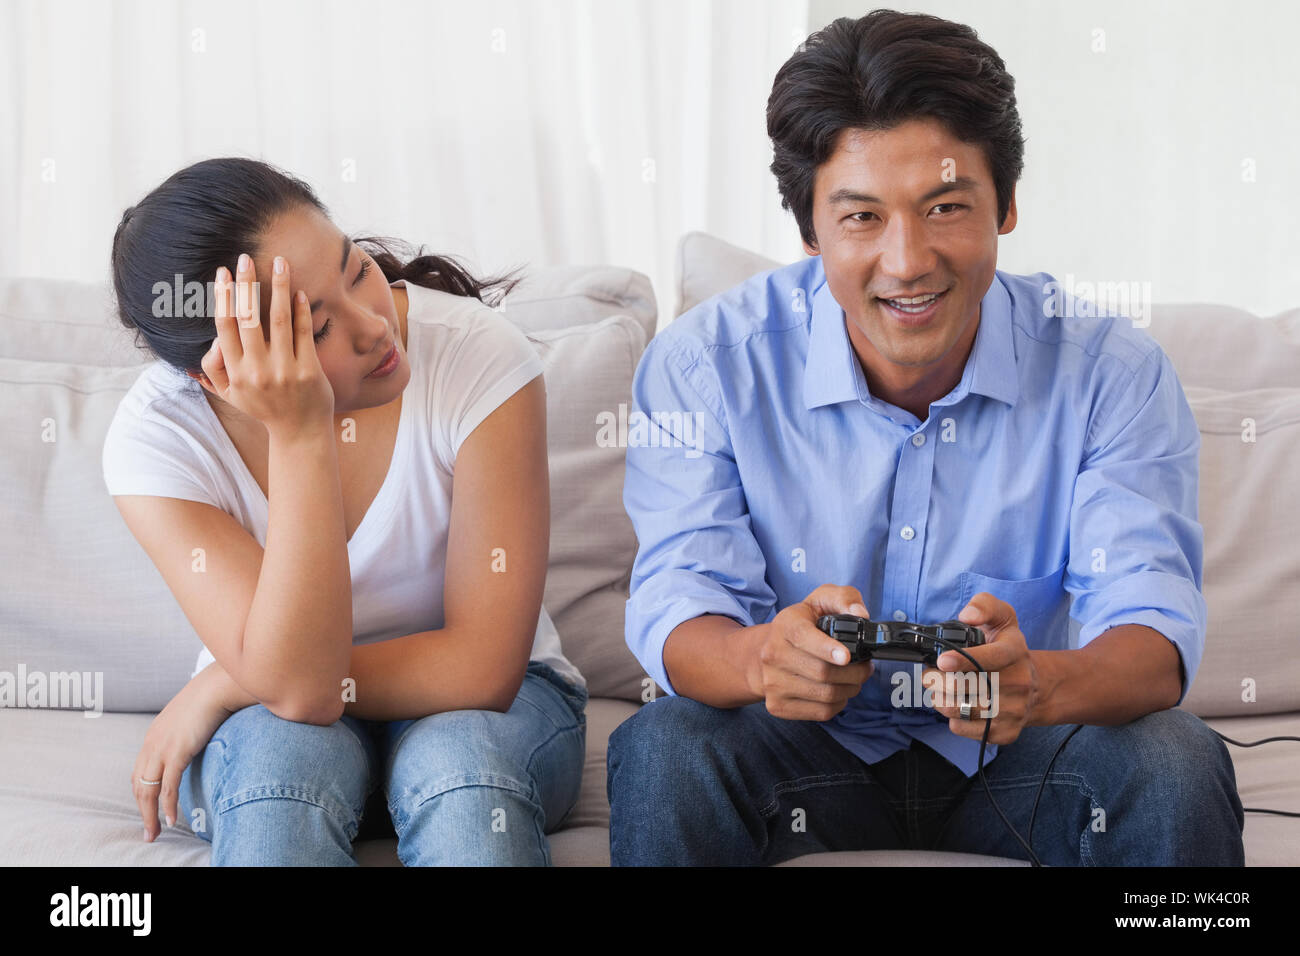 Games to Play with Your Girlfriend at Home